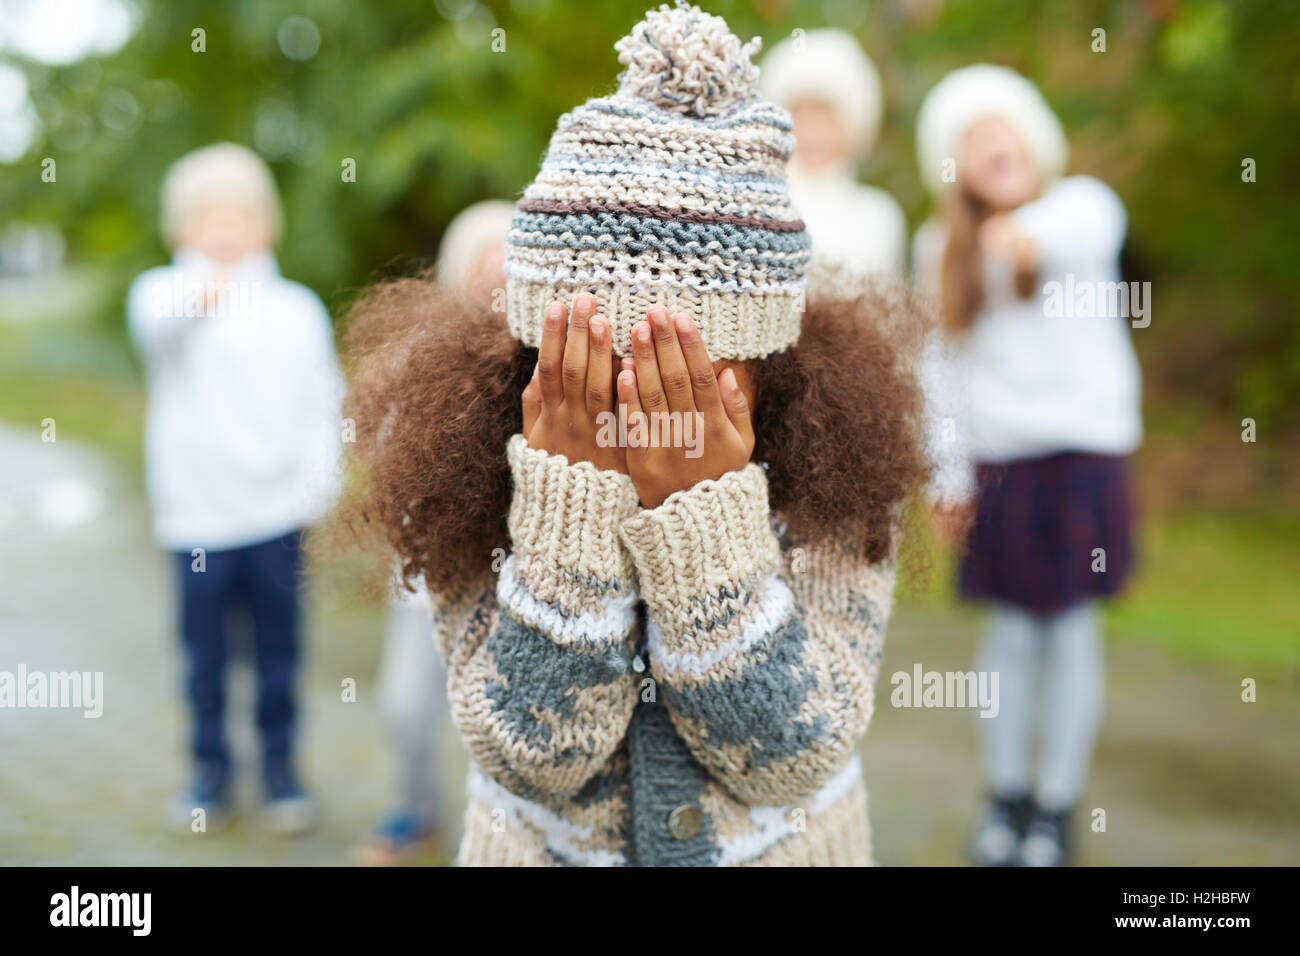 Crying girl hiding her face while classmates mocking at her Stock Photo